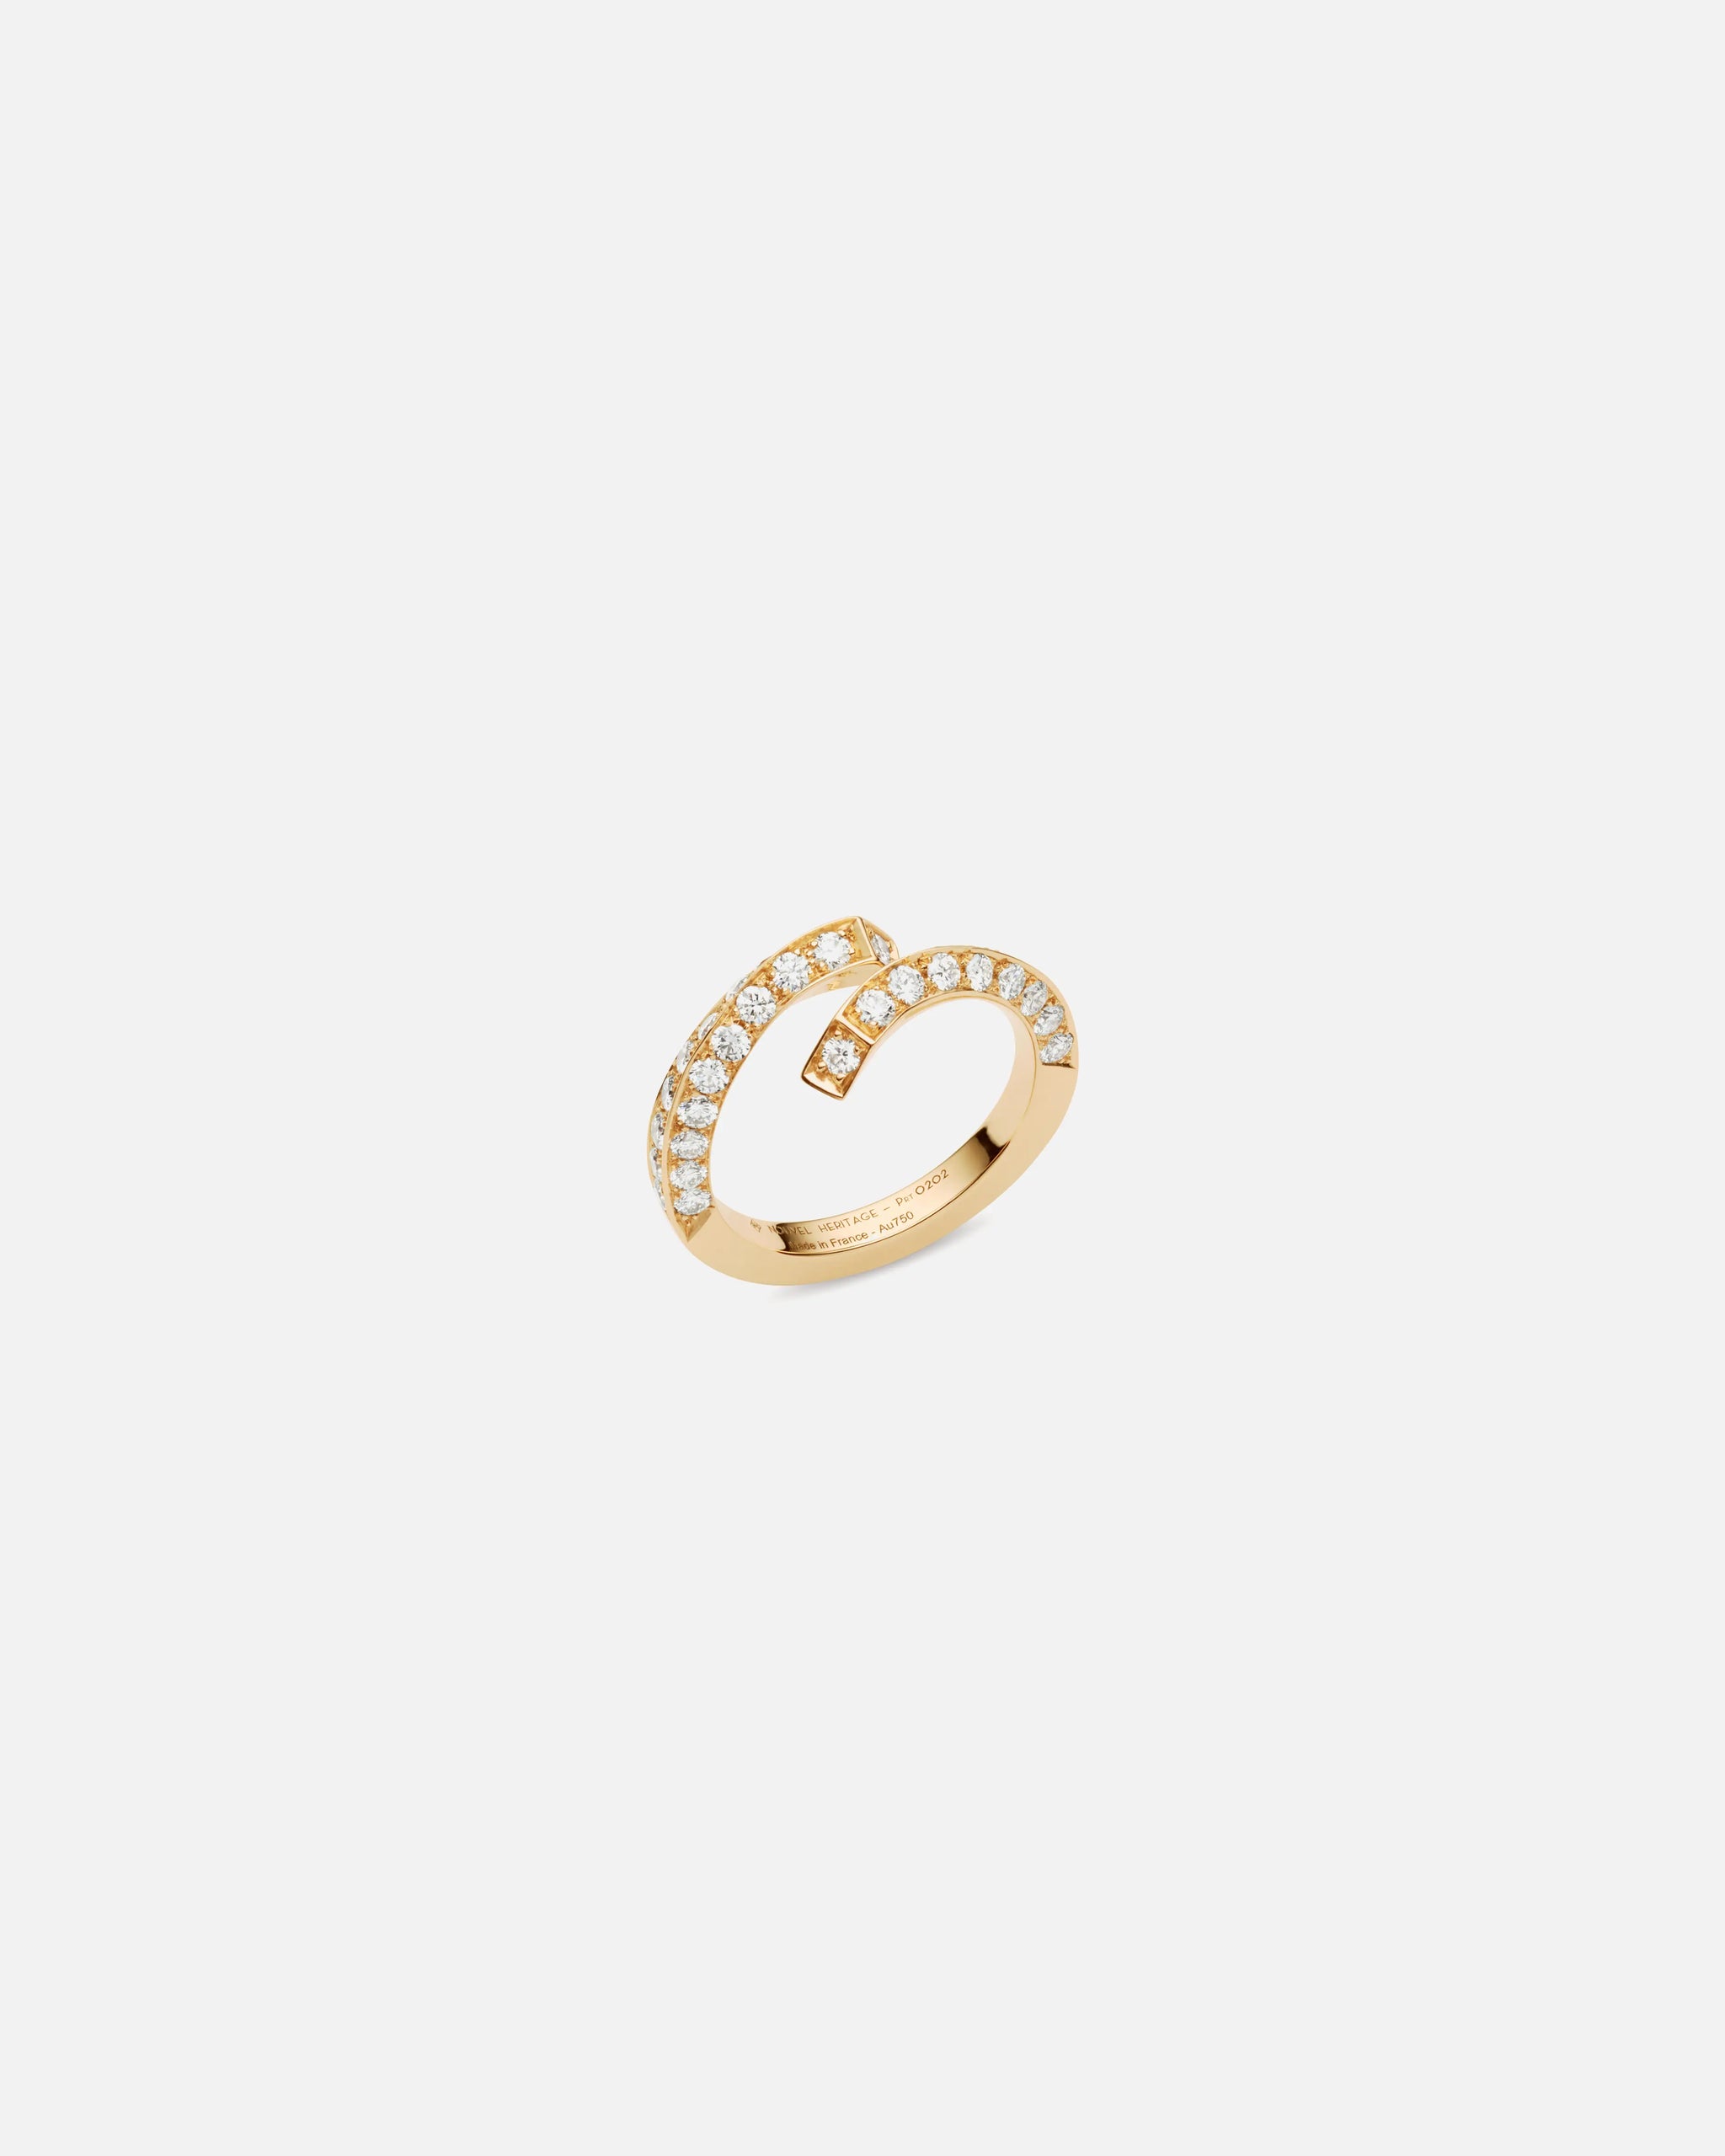 Diamond Thread Ring in Yellow Gold - 1 - Nouvel Heritage